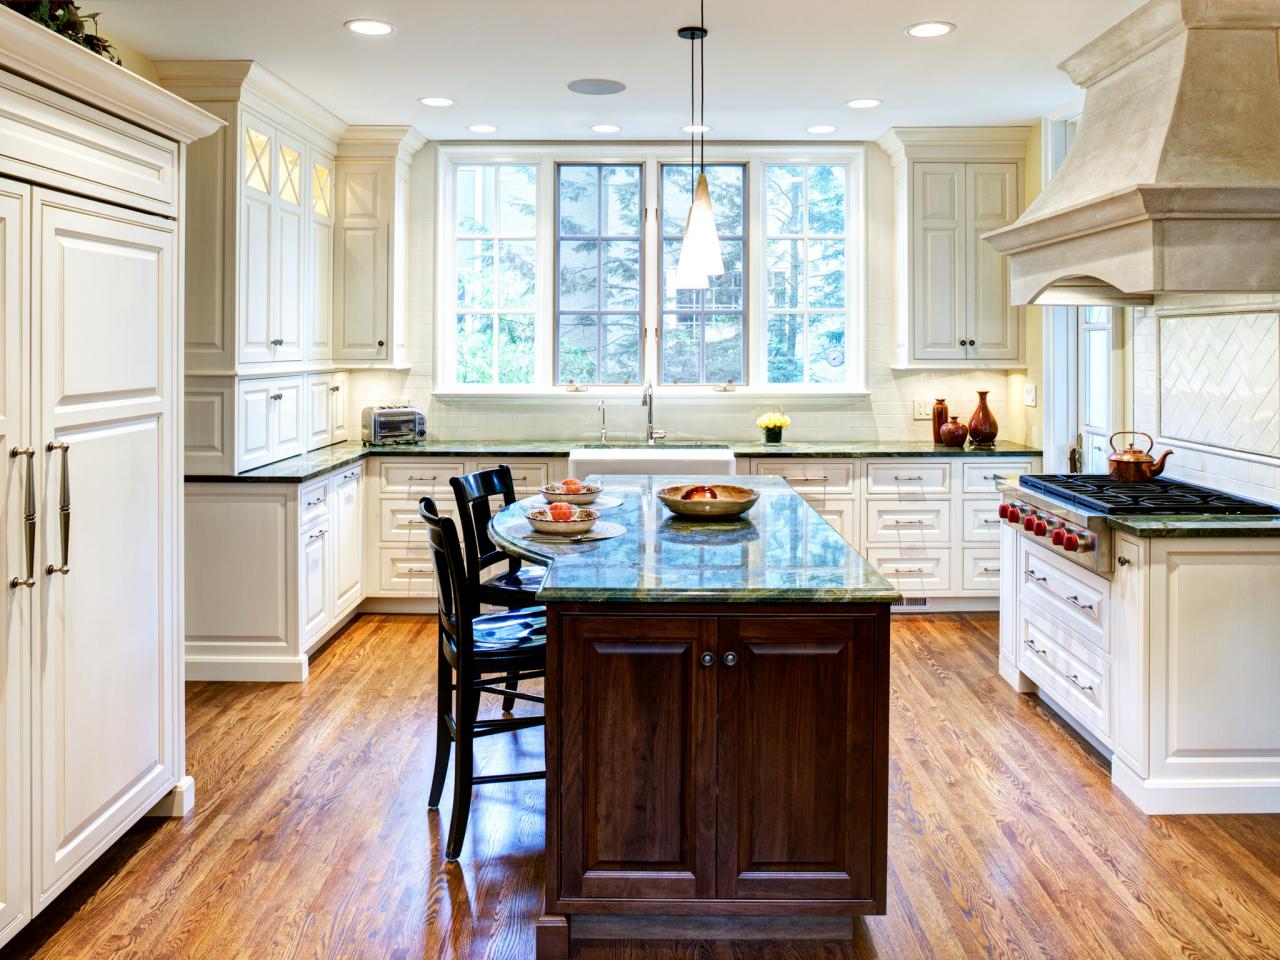 kitchen design with many windows